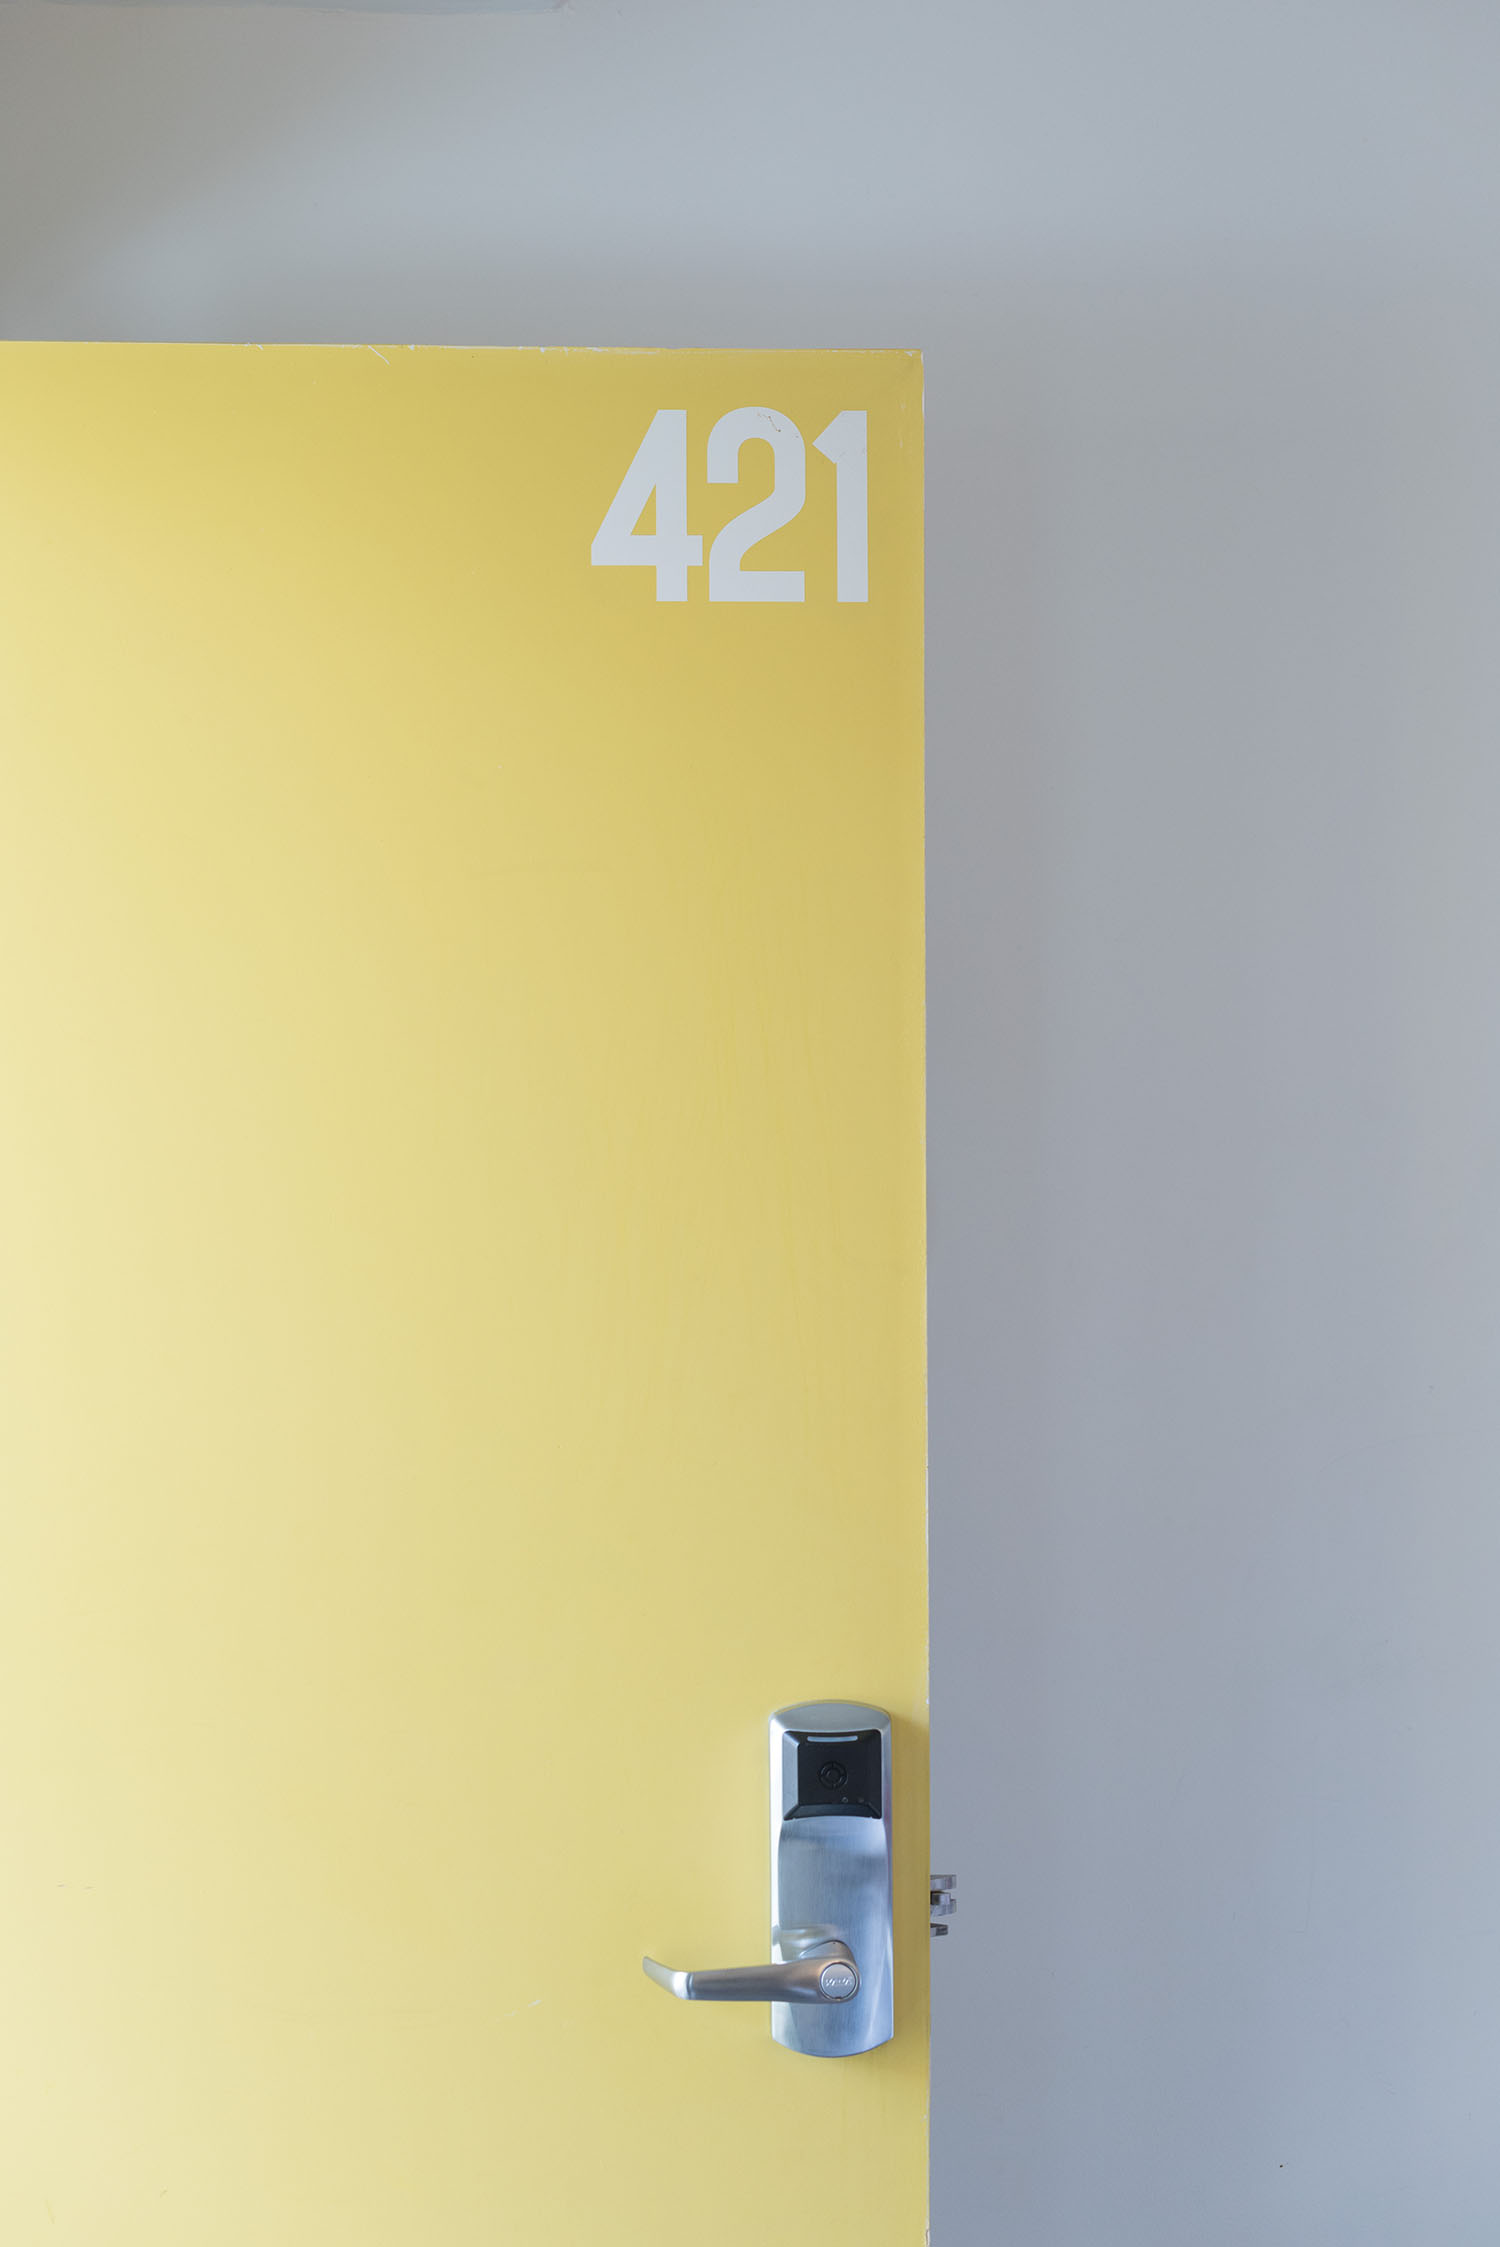 The yellow door to room 421 at The Burrard Hotel in Vancouver, as photographed by Canadian travel blogger Cee Fardoe of Coco & Vera